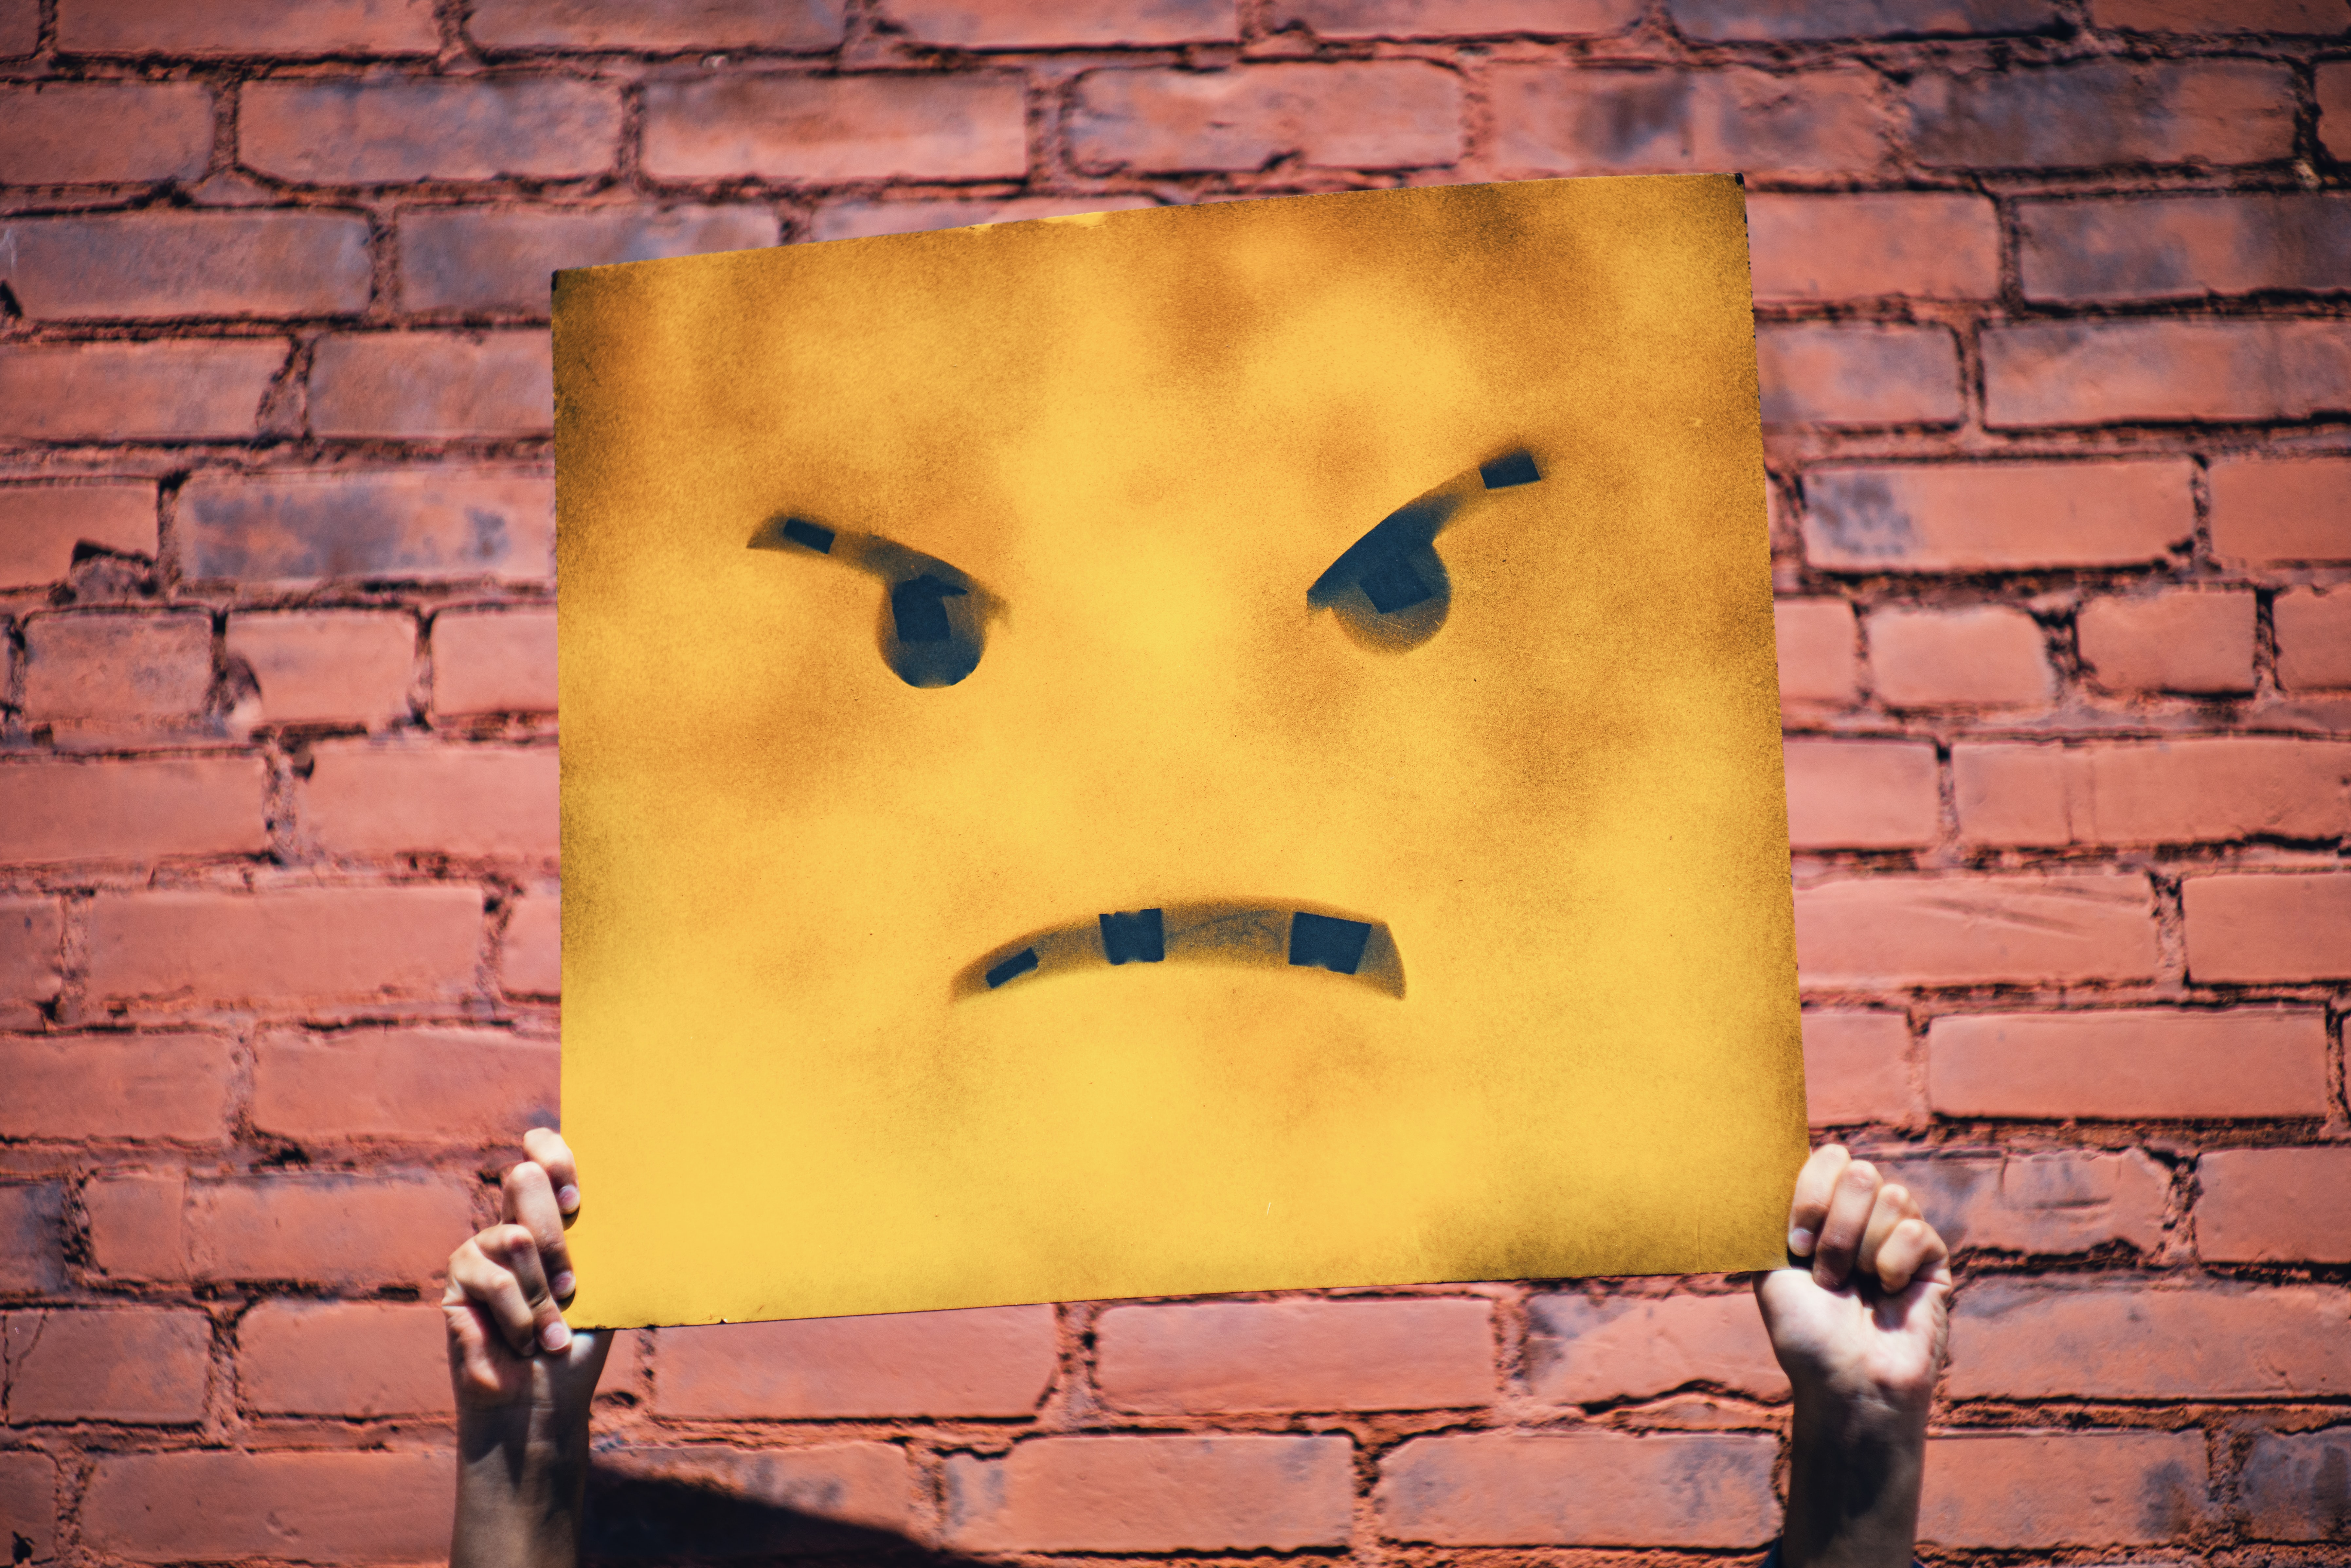 Person holding up sign with angry face on it standing in front of red brick wall; image by Andre Hunter, via Unsplash.com.